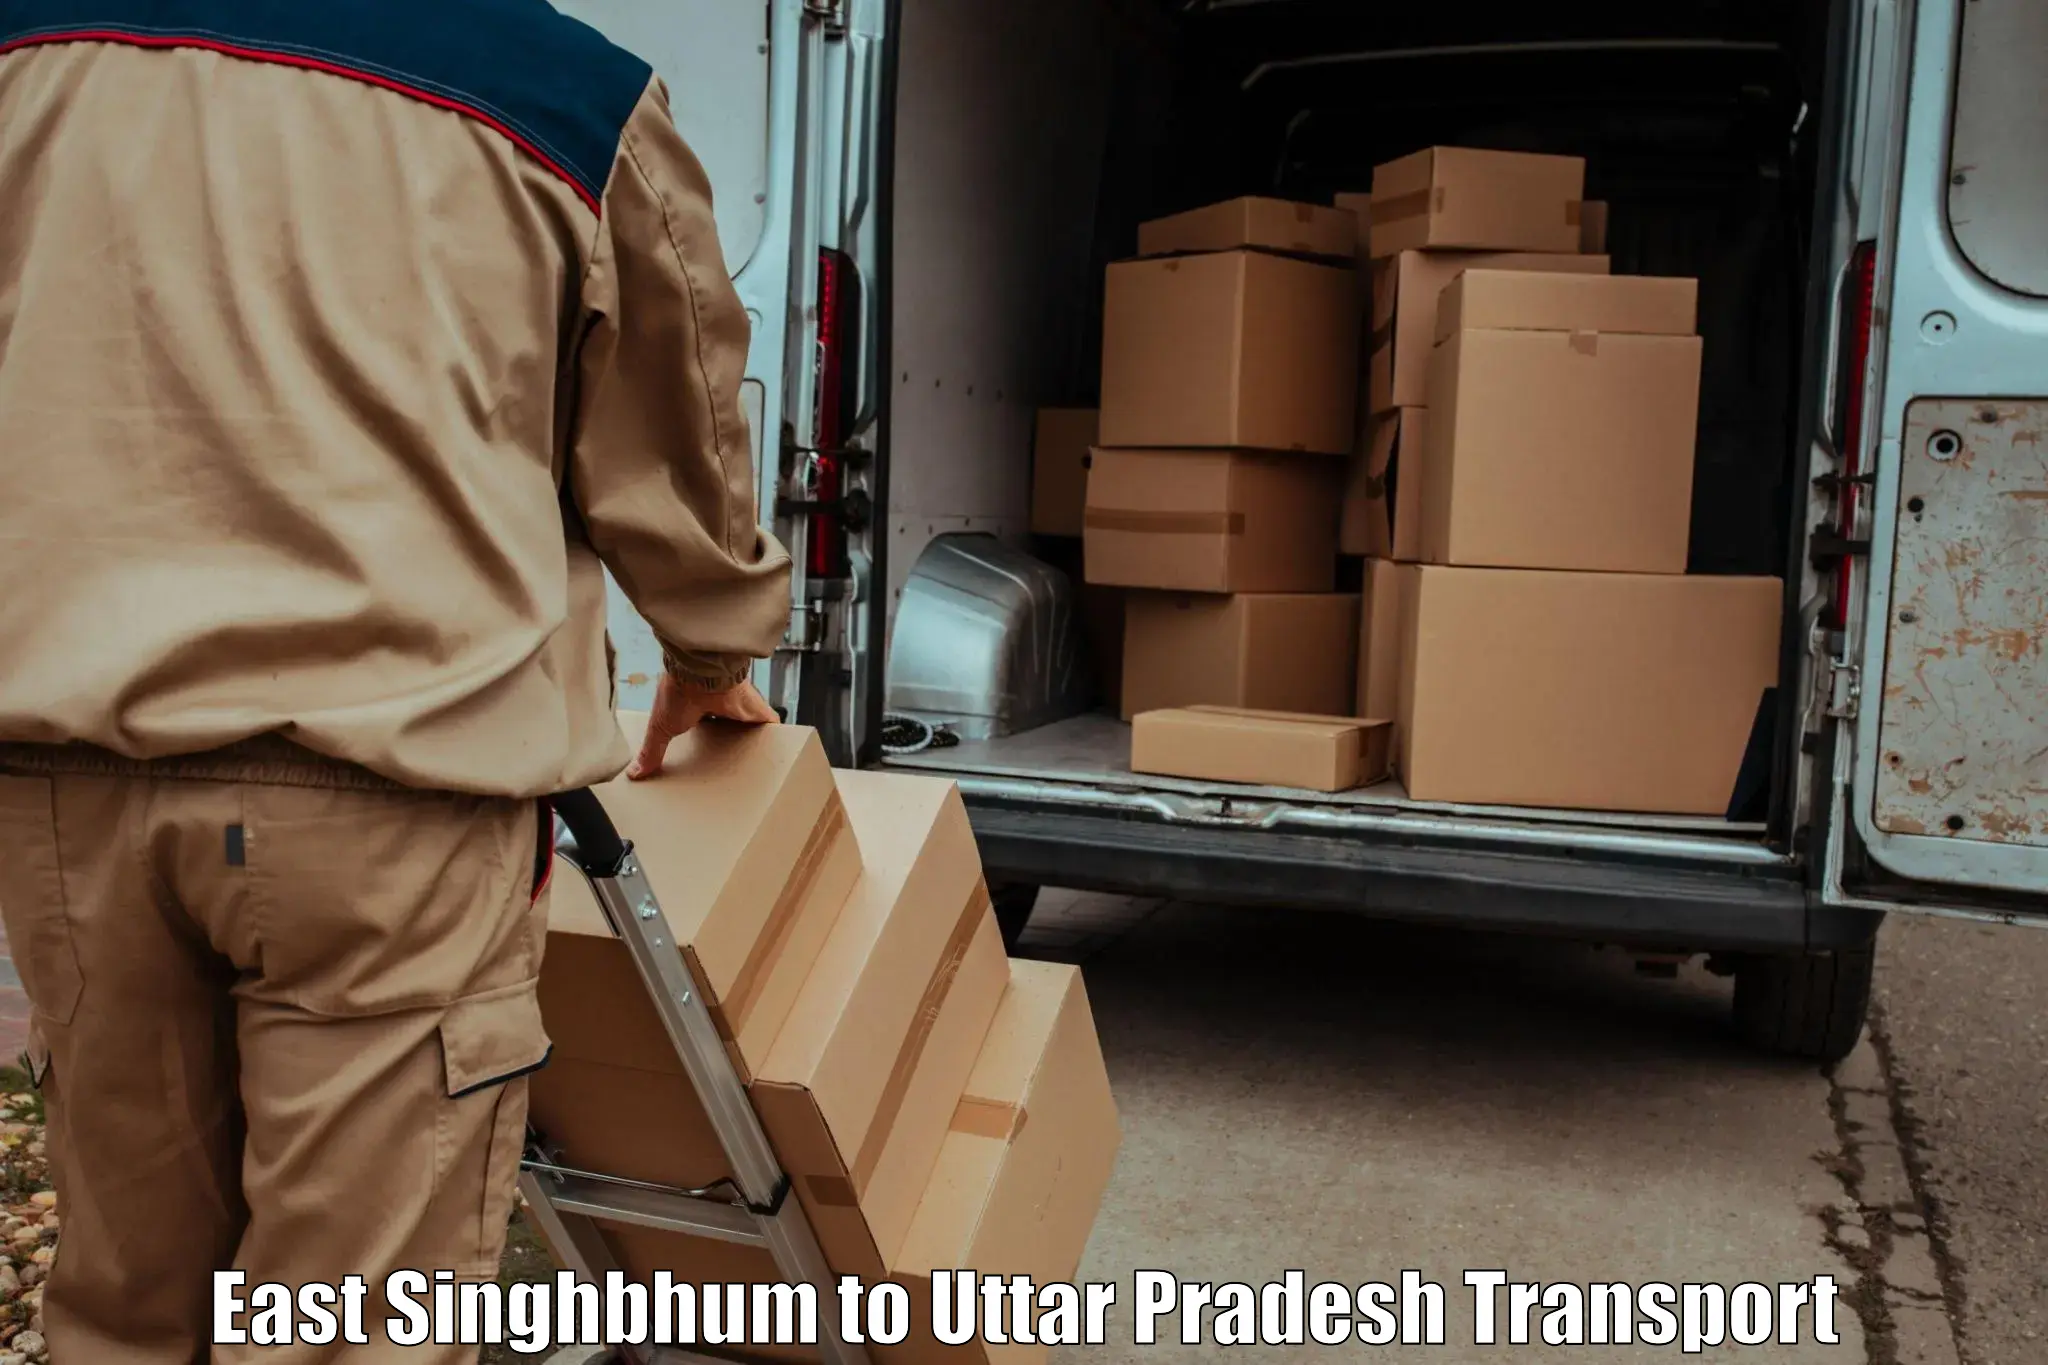 Shipping services East Singhbhum to Fatehabad Agra